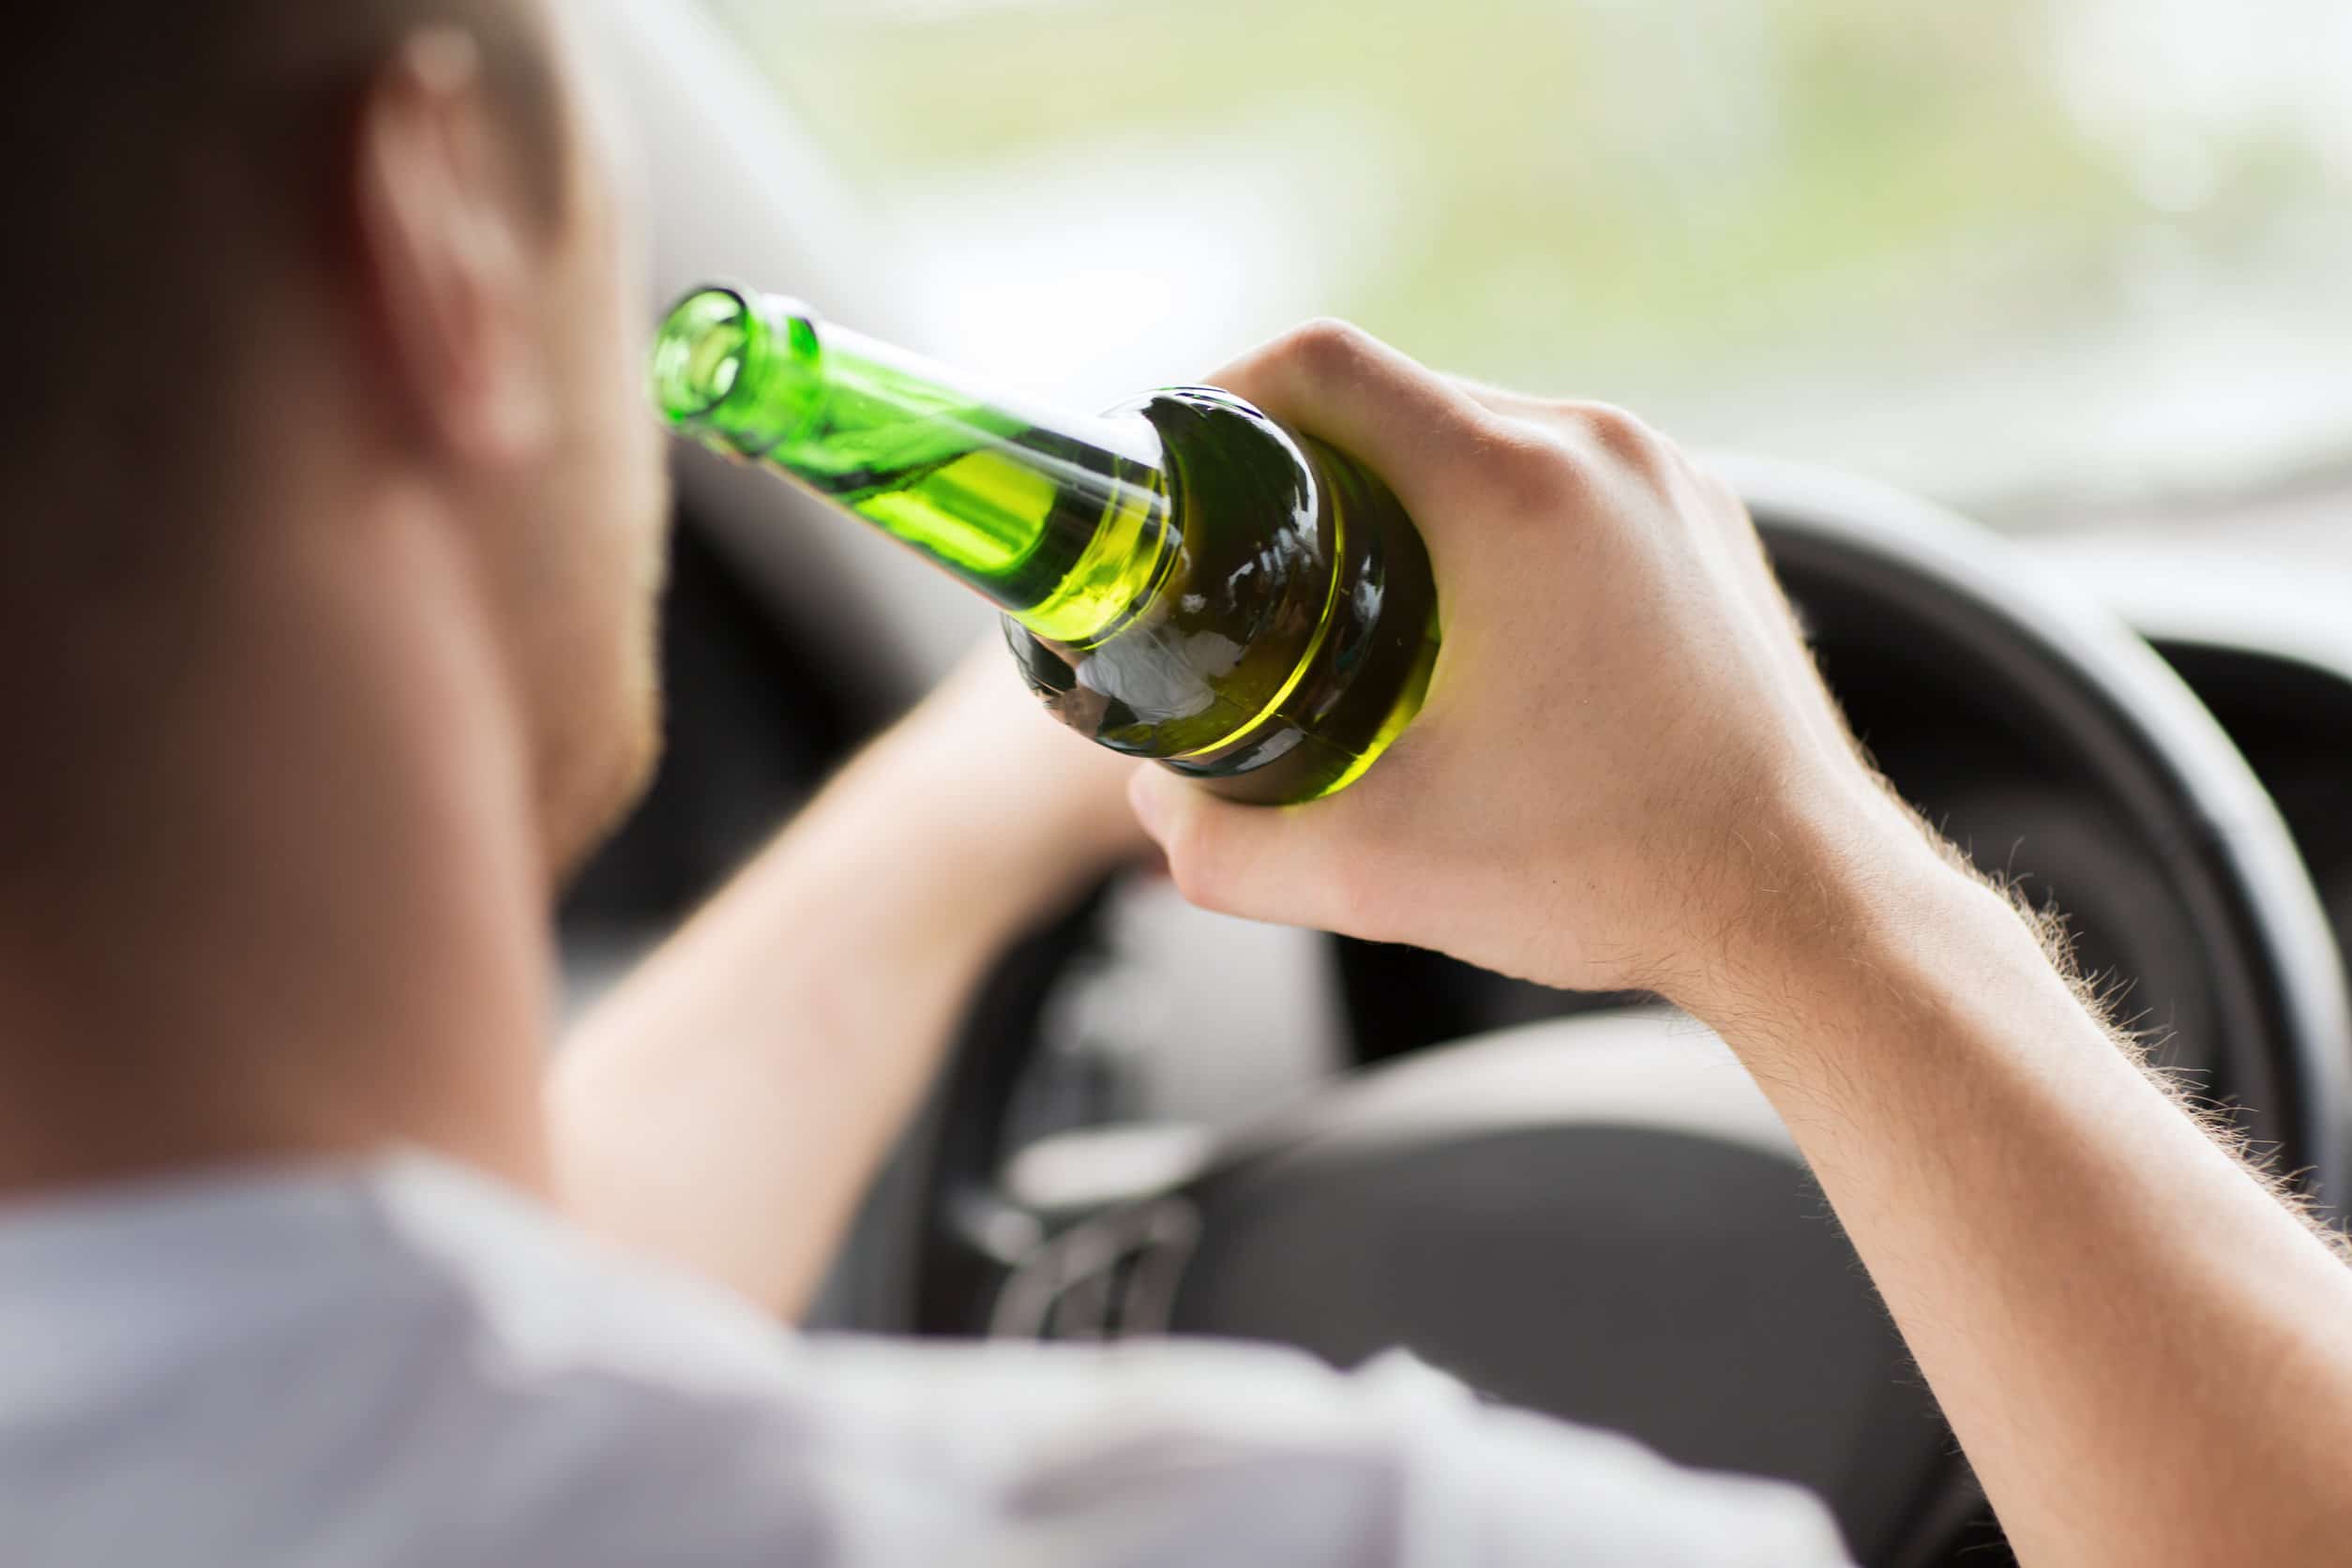 A Wet Reckless Charge: Lowering the Severity of a DUI